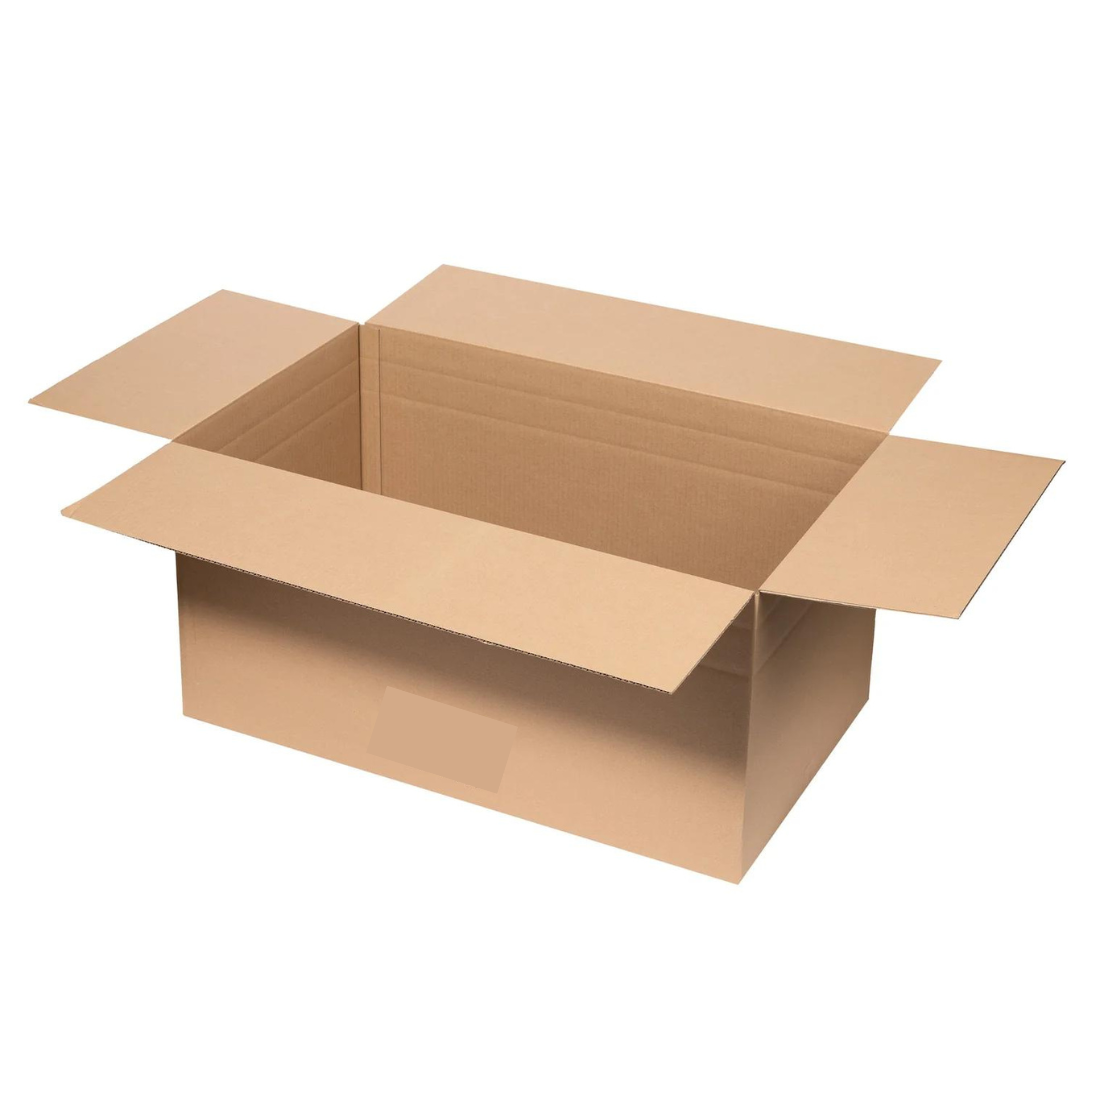 K80 Single Walled Cardboard Box - Designed to accommodate large household appliances like mini fridges, sandpits, and children's play tables (PACK OF 50)